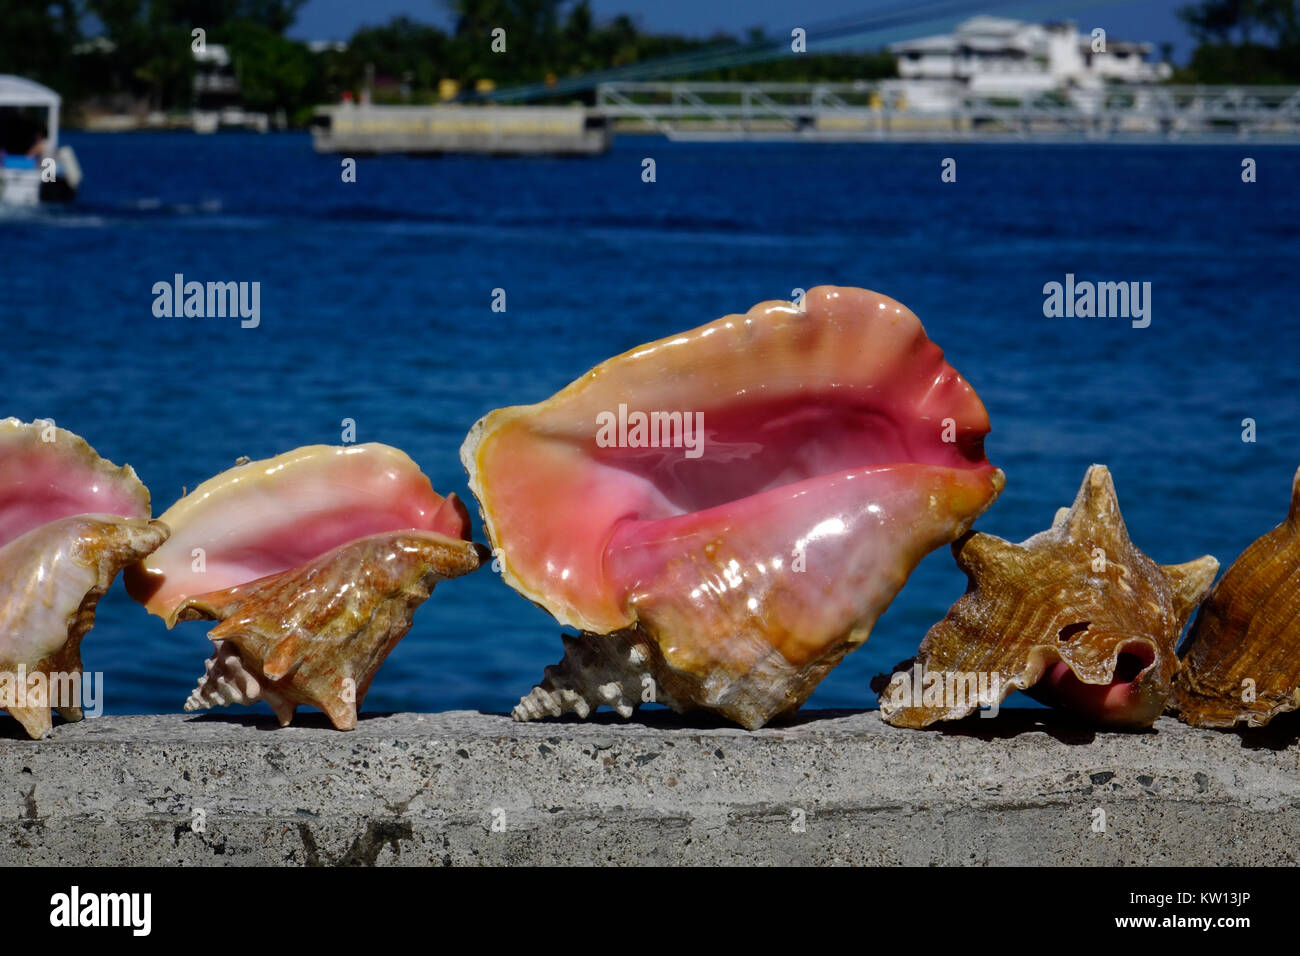 These beautiful Queen Conch shells are for sale along the quay in Nassau, Bahamas. The conch is a marine gastropod or mollusk. It's meat is used for c Stock Photo